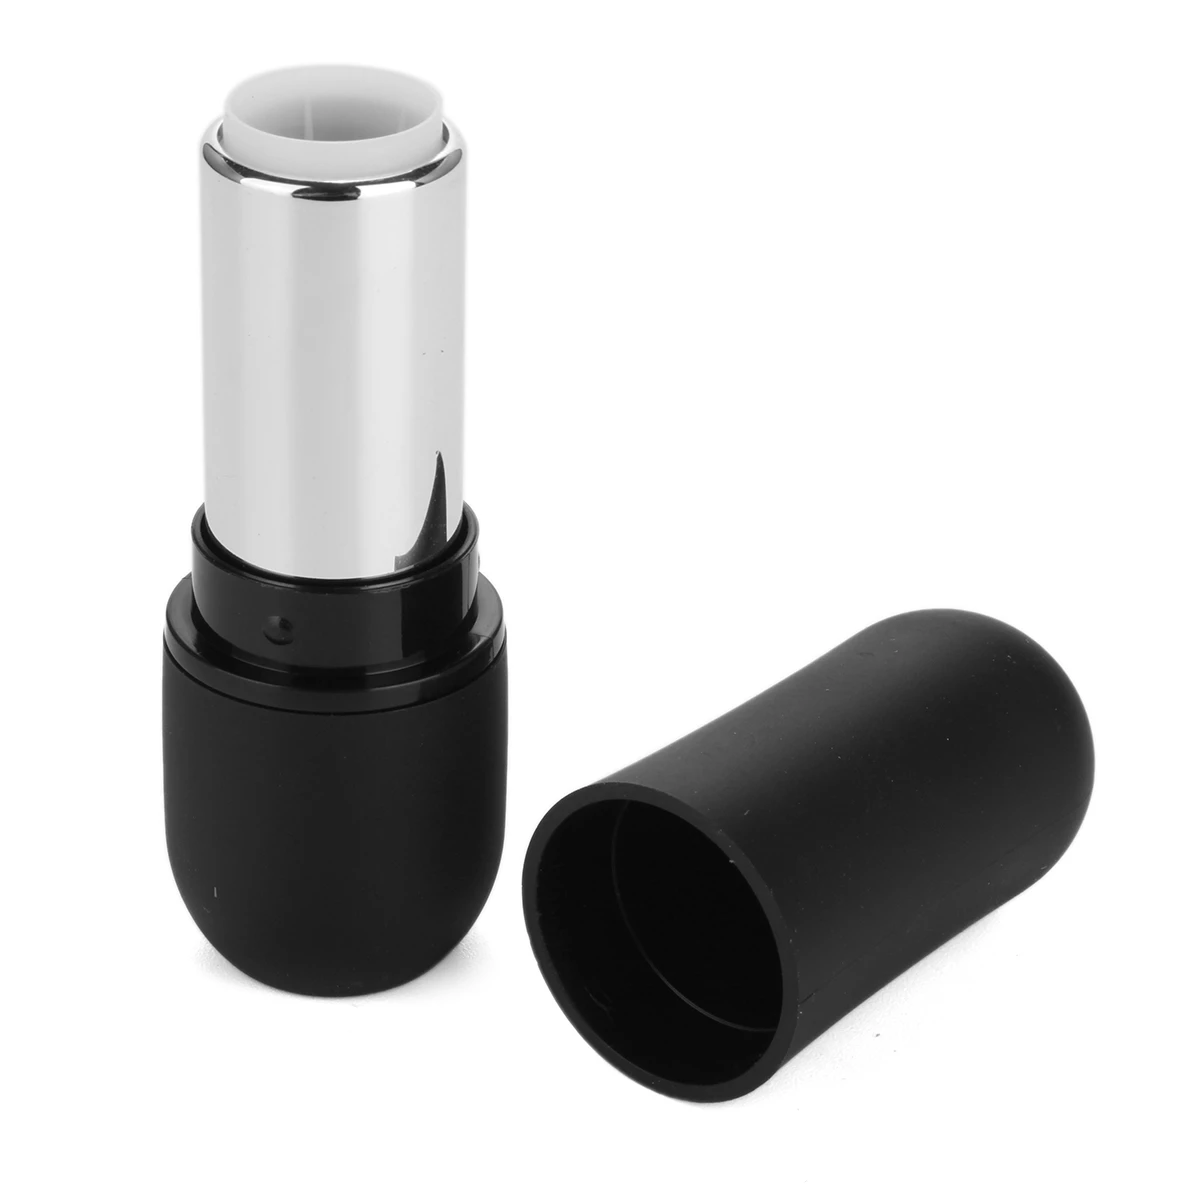 Matte Black Round Empty Lipstick Tube Lip Balm Refillable Container DIY Makeup Cosmetic Tool